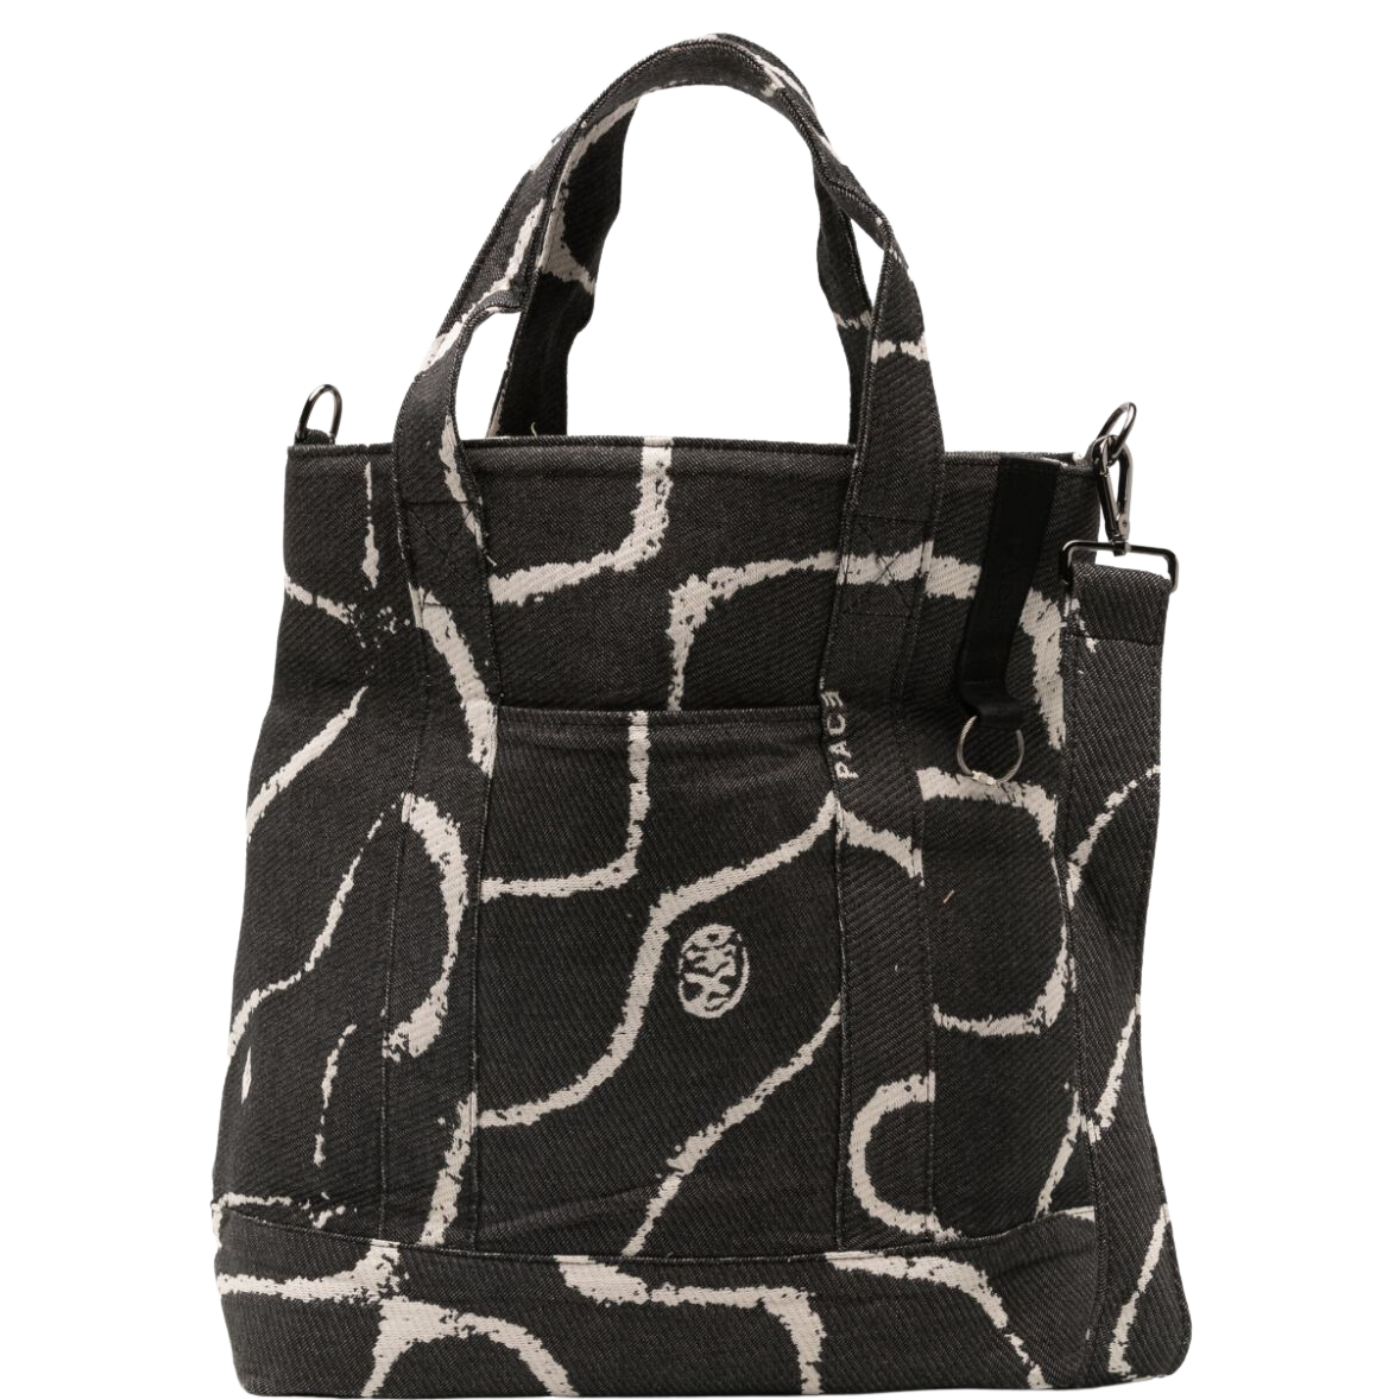 Pace Tote Bag Jacquard Chlndis Figures